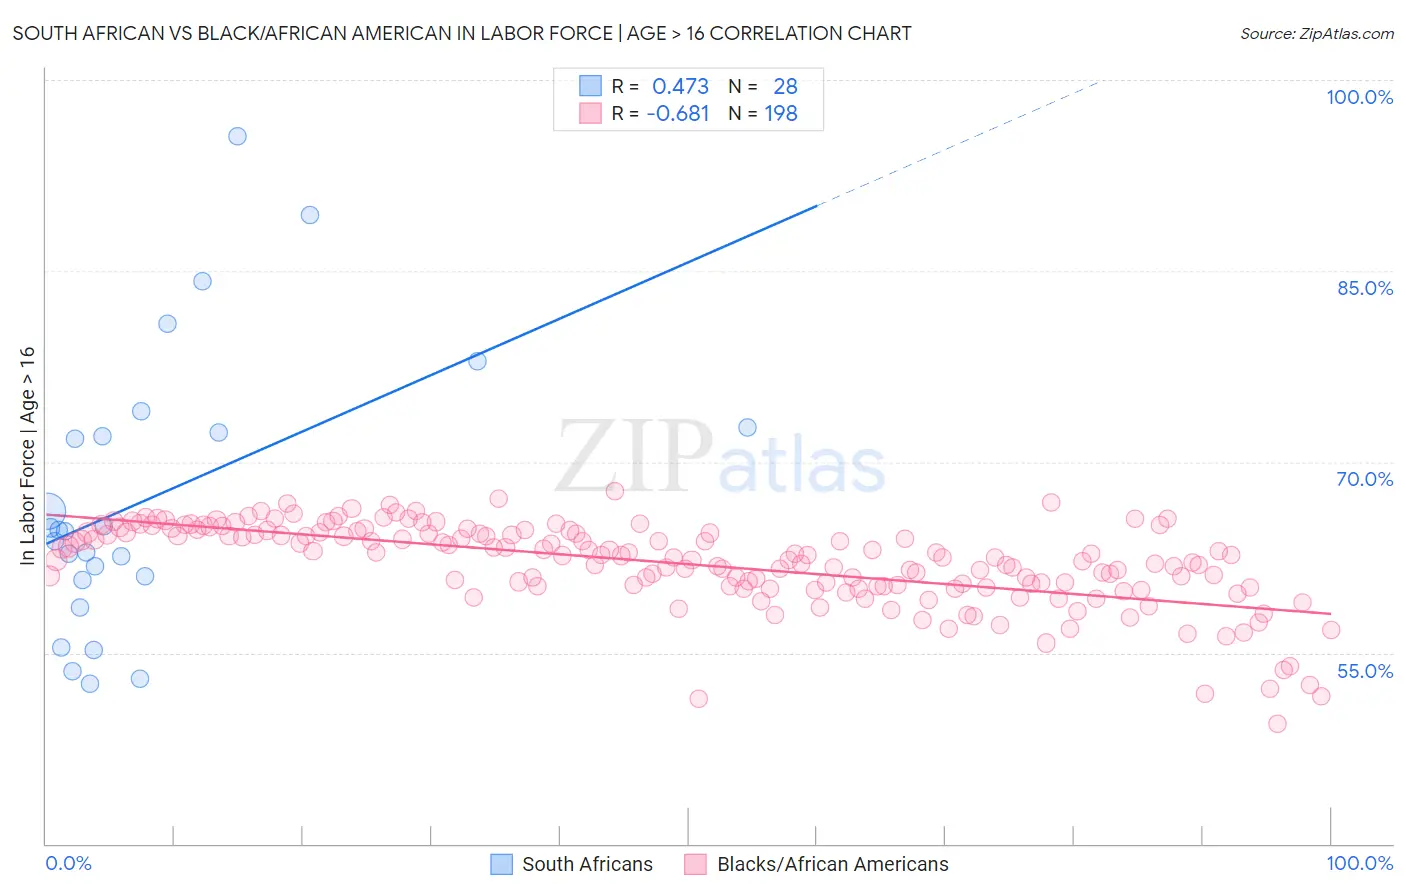 South African vs Black/African American In Labor Force | Age > 16